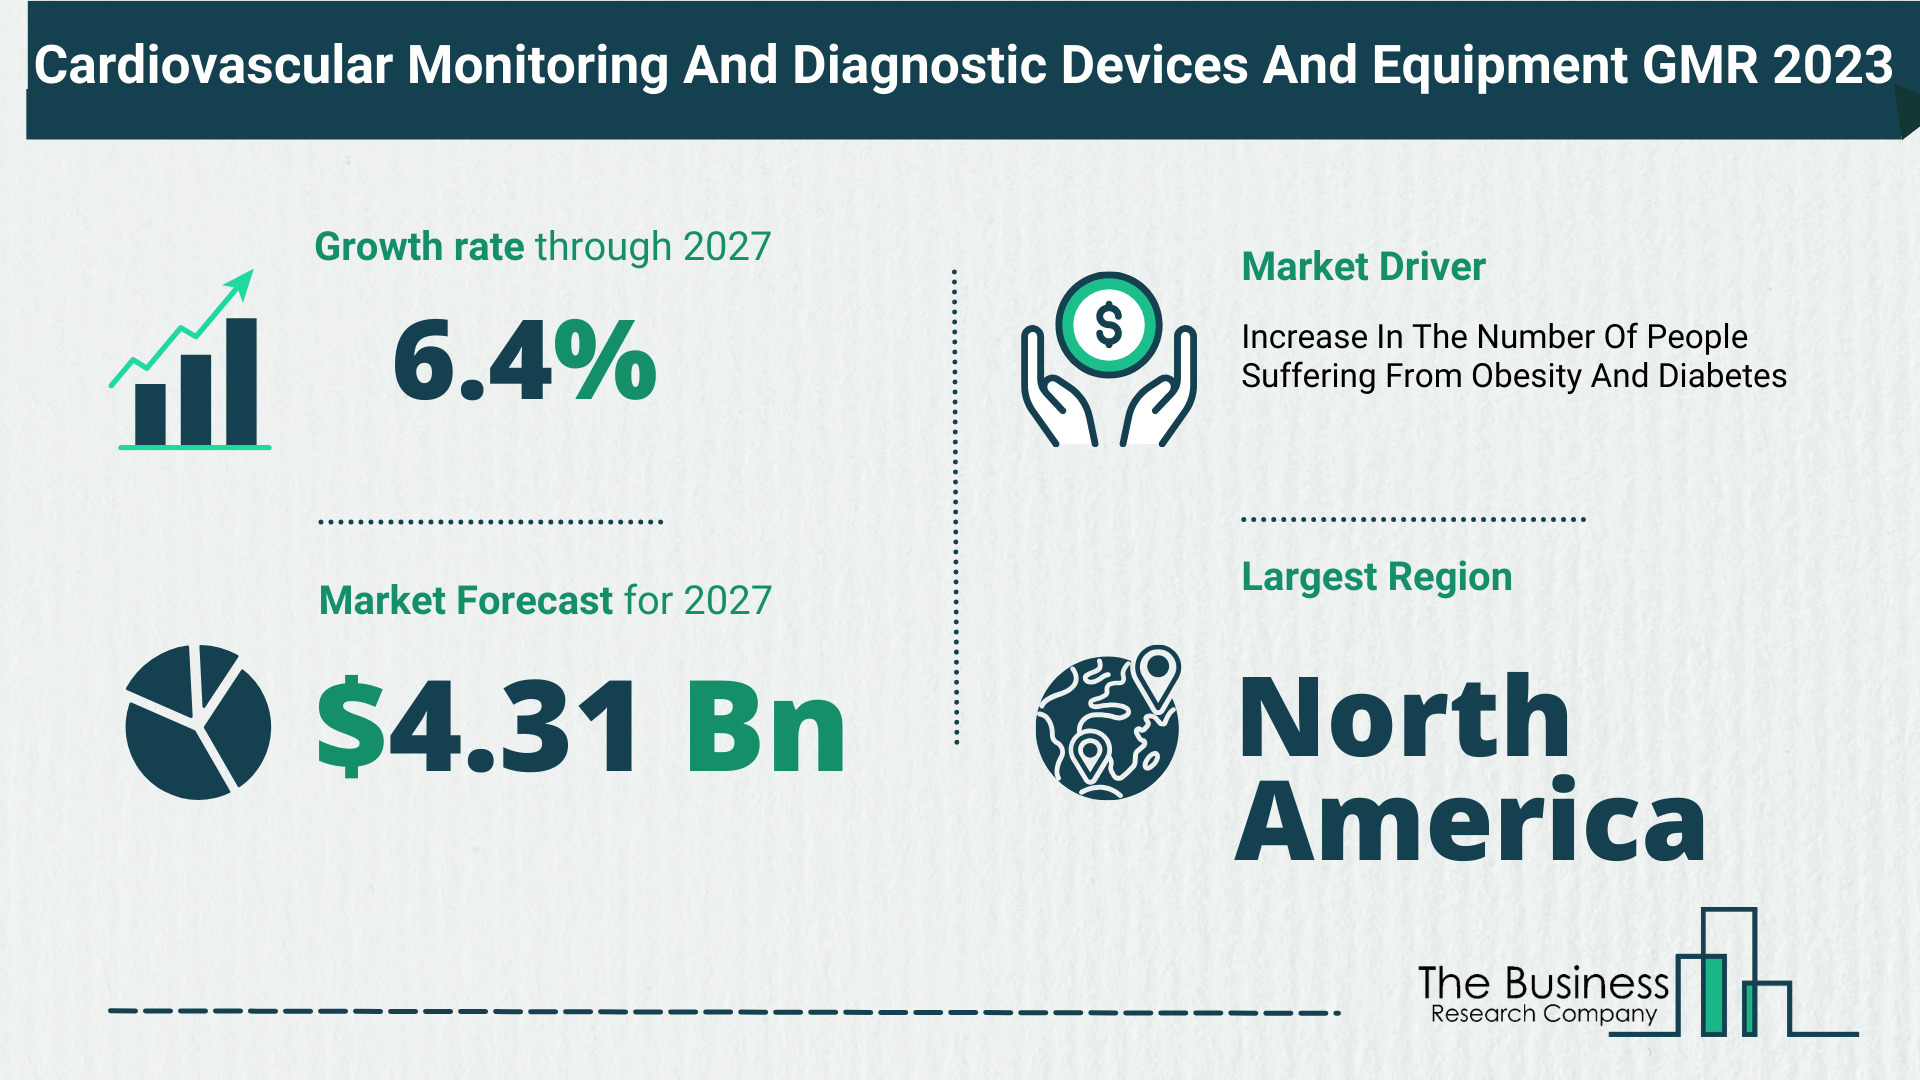 5 Key Insights On The Cardiovascular Monitoring And Diagnostic Devices And Equipment Market 2023